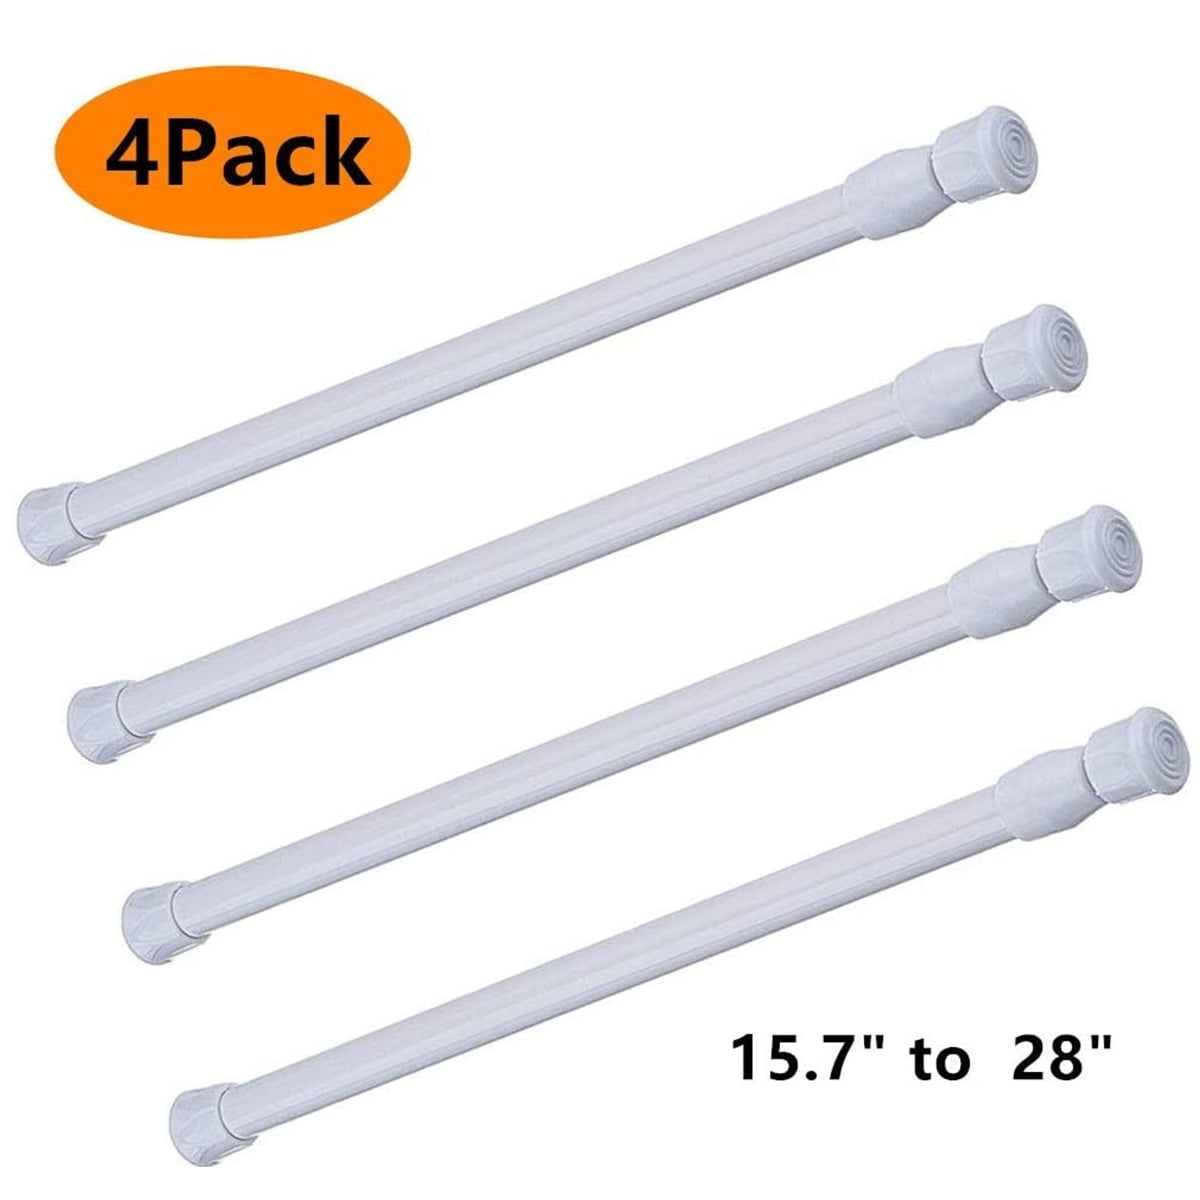 Inkach Tension Rods 4 Pack Adjustable, 108 Inch Tension Curtain Rod